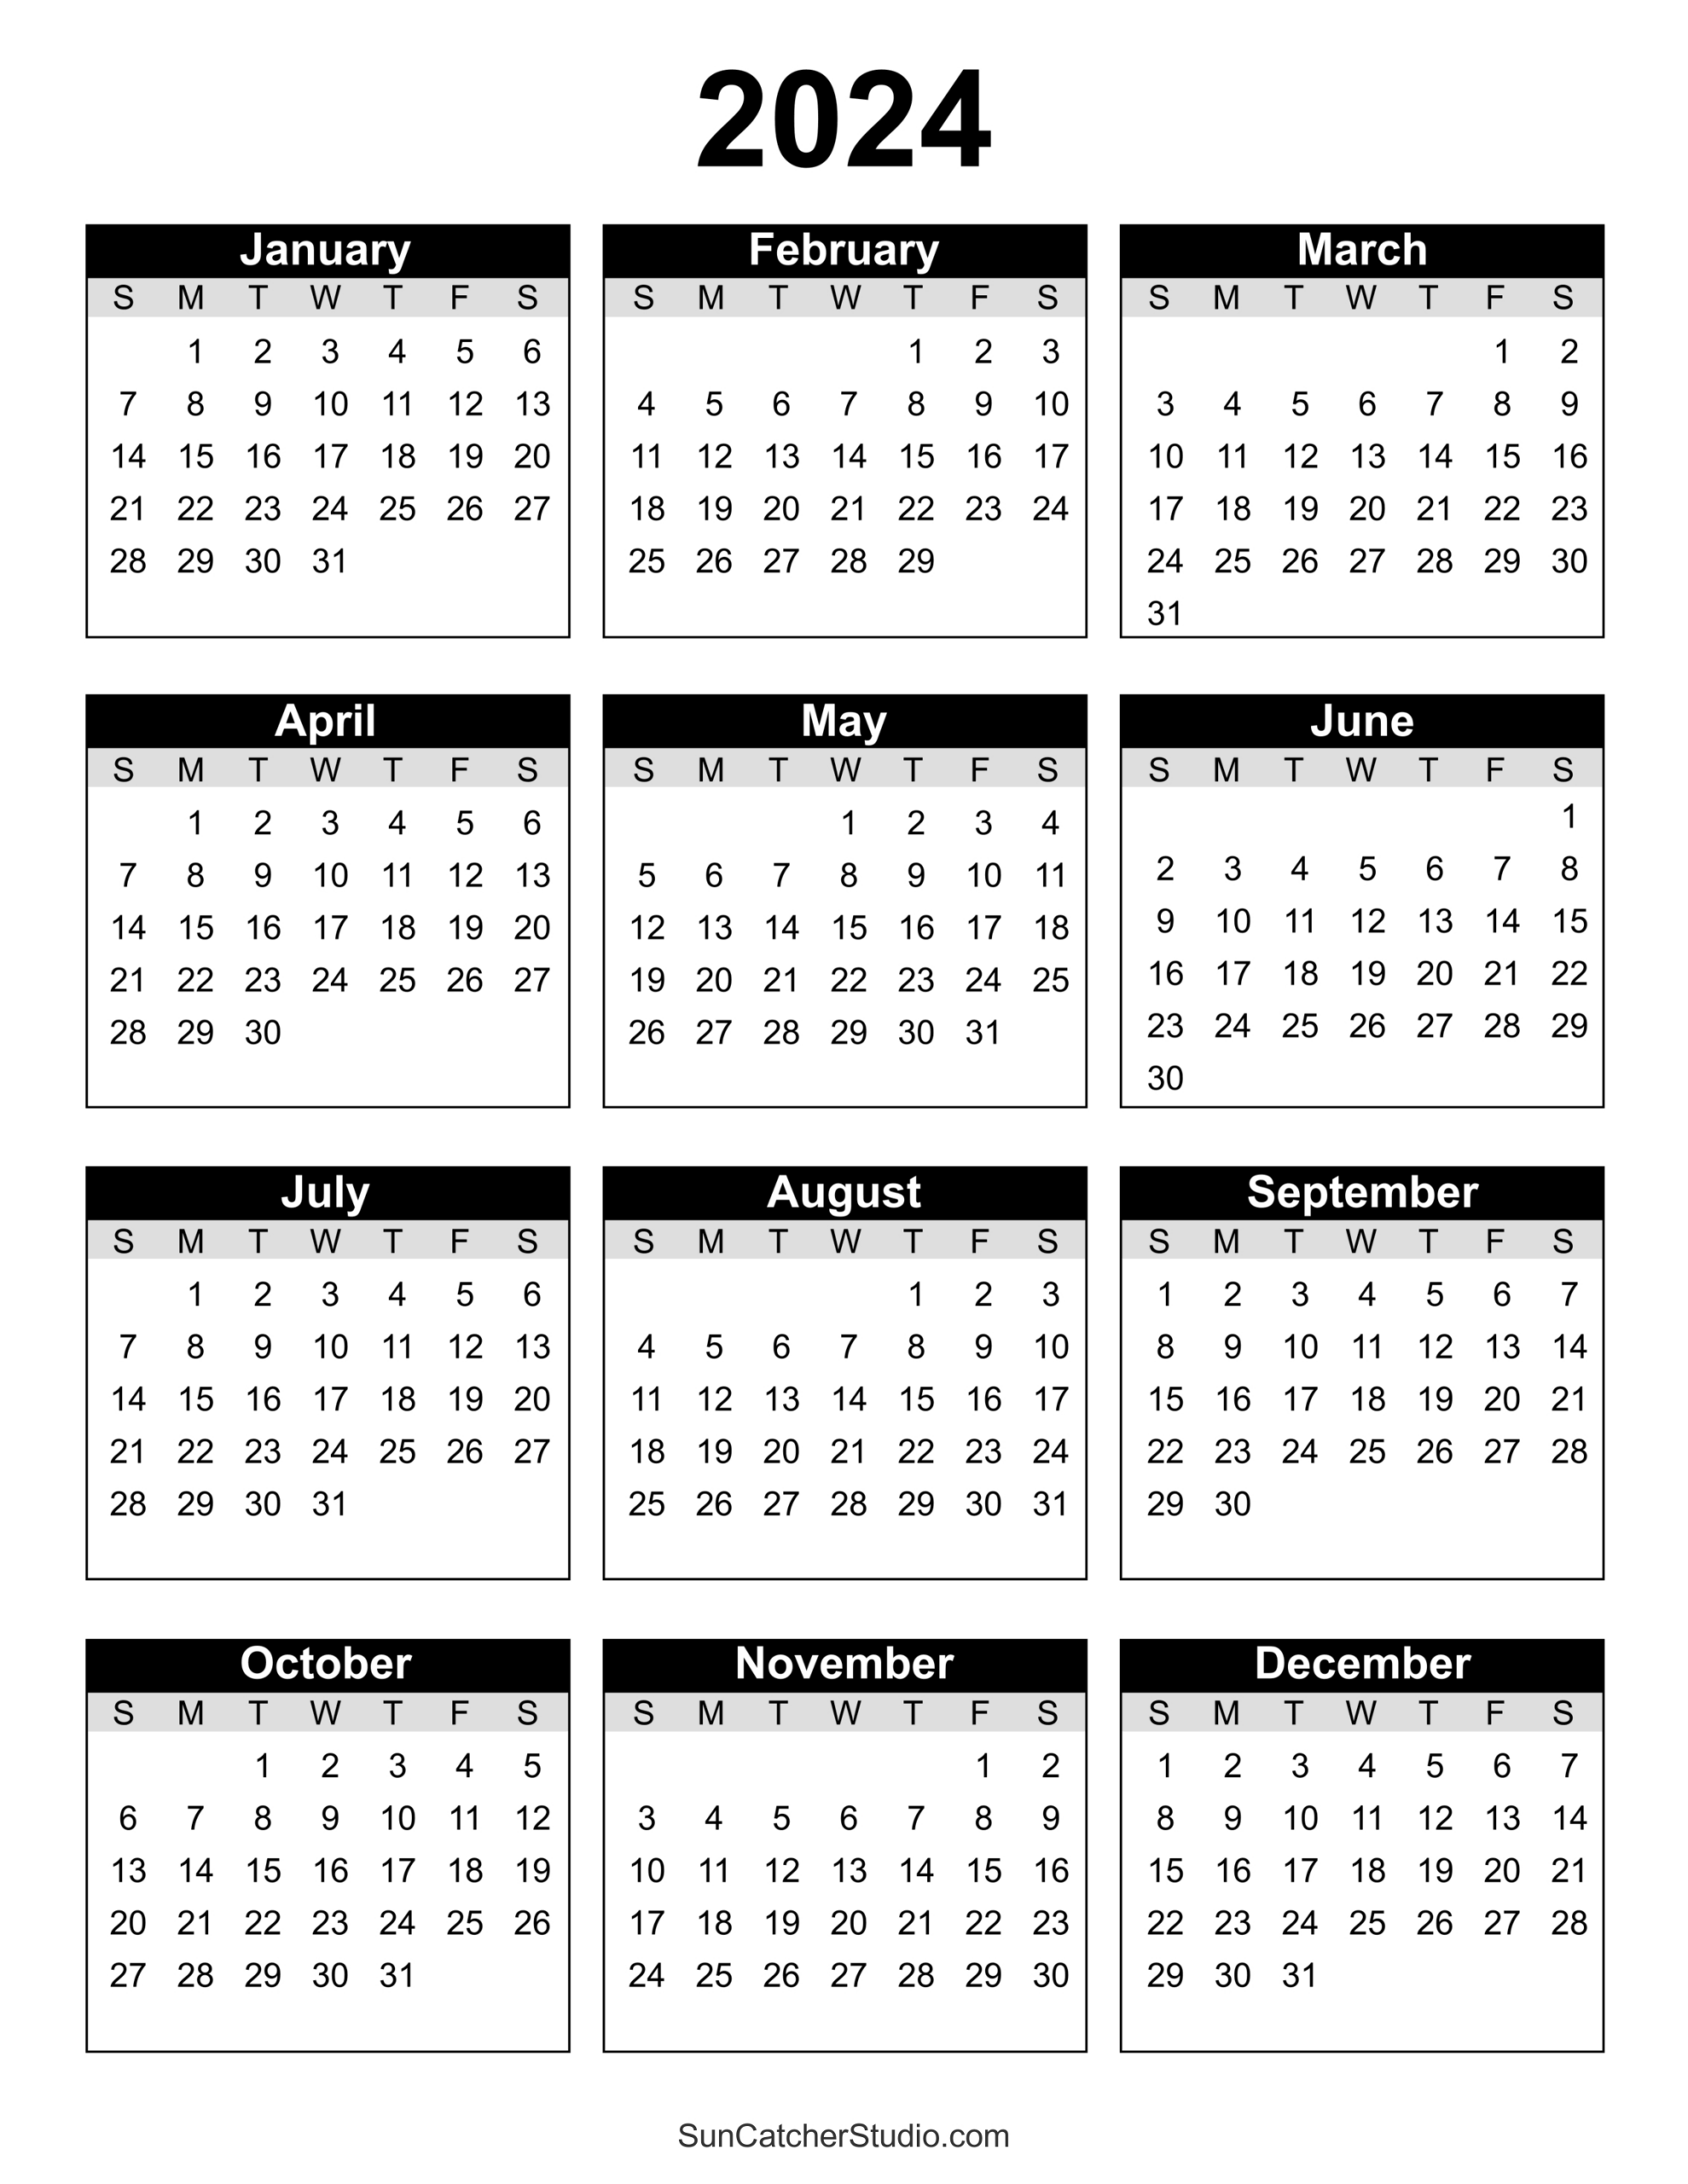 Free Printable 2024 Yearly Calendar – Diy Projects, Patterns | Printable Calendar 2024 Yearly Free